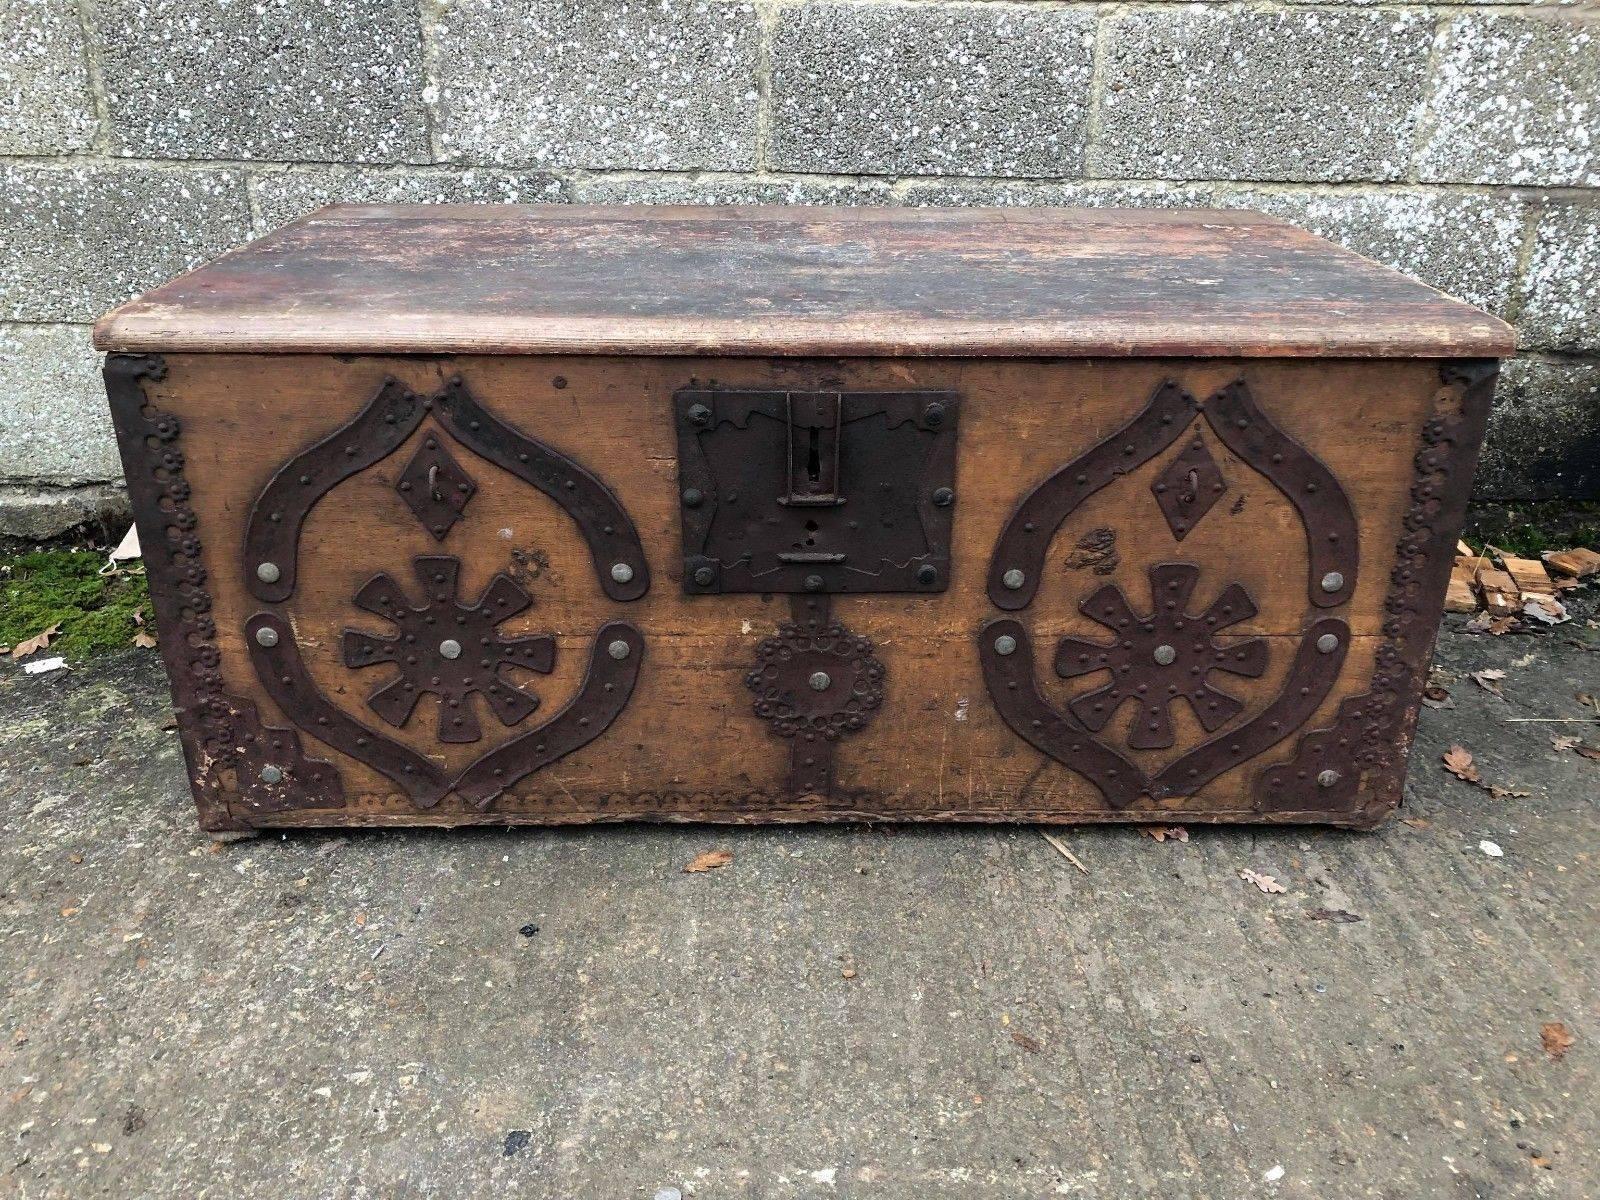 Stunning and original European marriage chest. These trunks/chests are becoming harder and harder to source now and prices have increased rapidly over the past 6 months. Very on trend!

Dimensions: 114 cm wide, 55 cm tall, 50 cm deep.